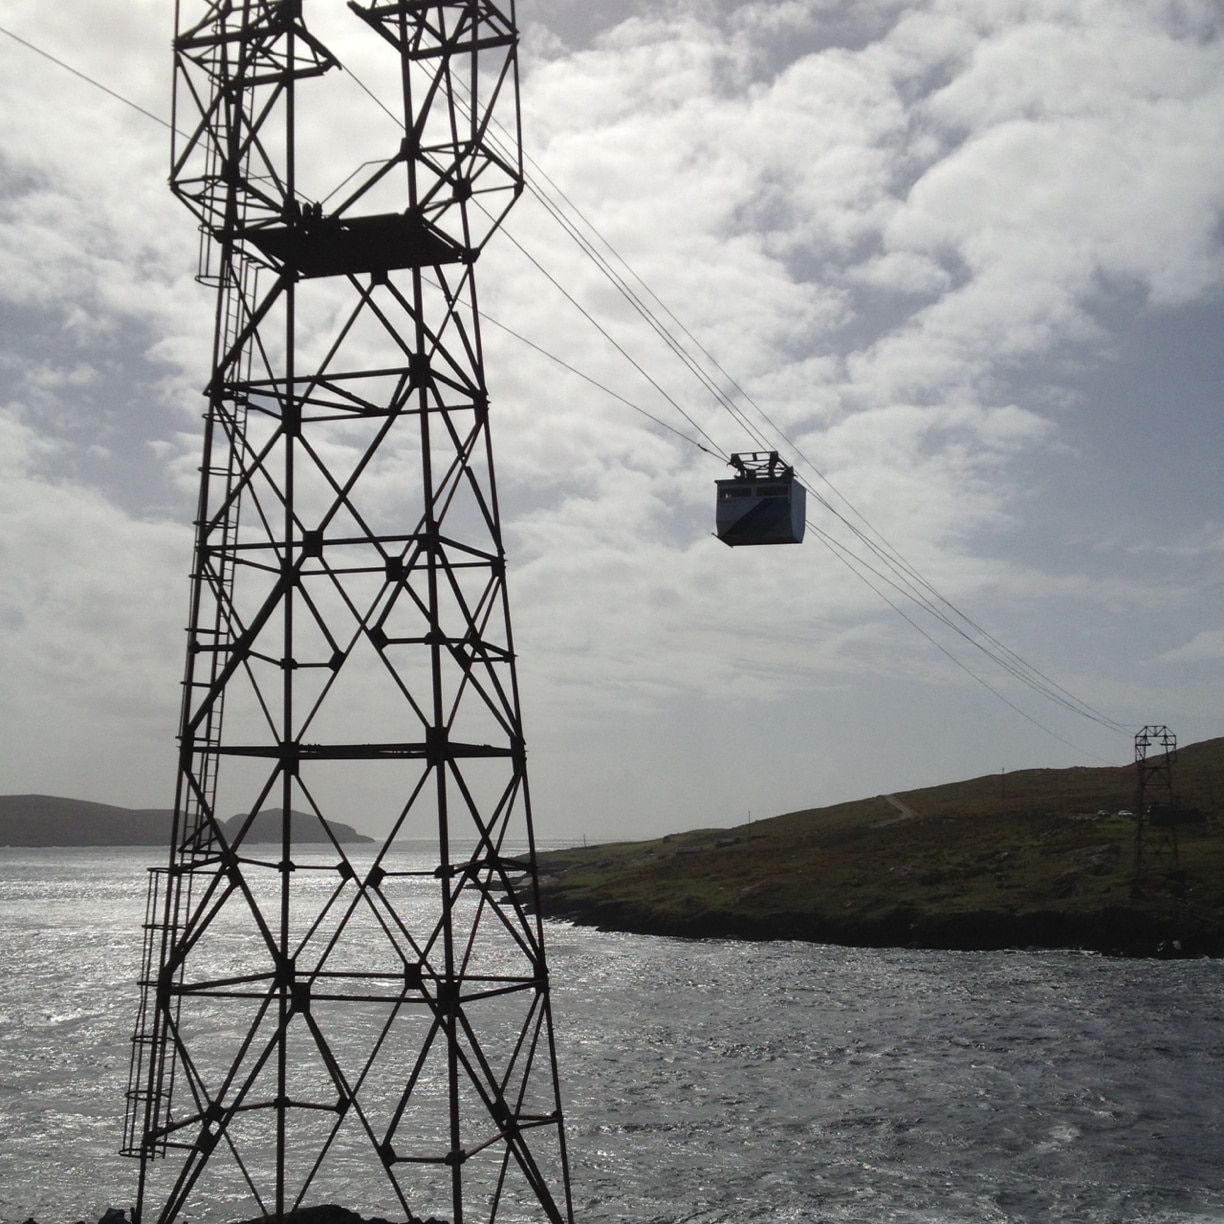 The only cable car in Ireland. Twelve minute ride in a little wooden car, get blown around by high winds on the way over. Oh, you may share the ride with sheep. That's how they get them to the Island. About ten permanent residents on Dursey Island.